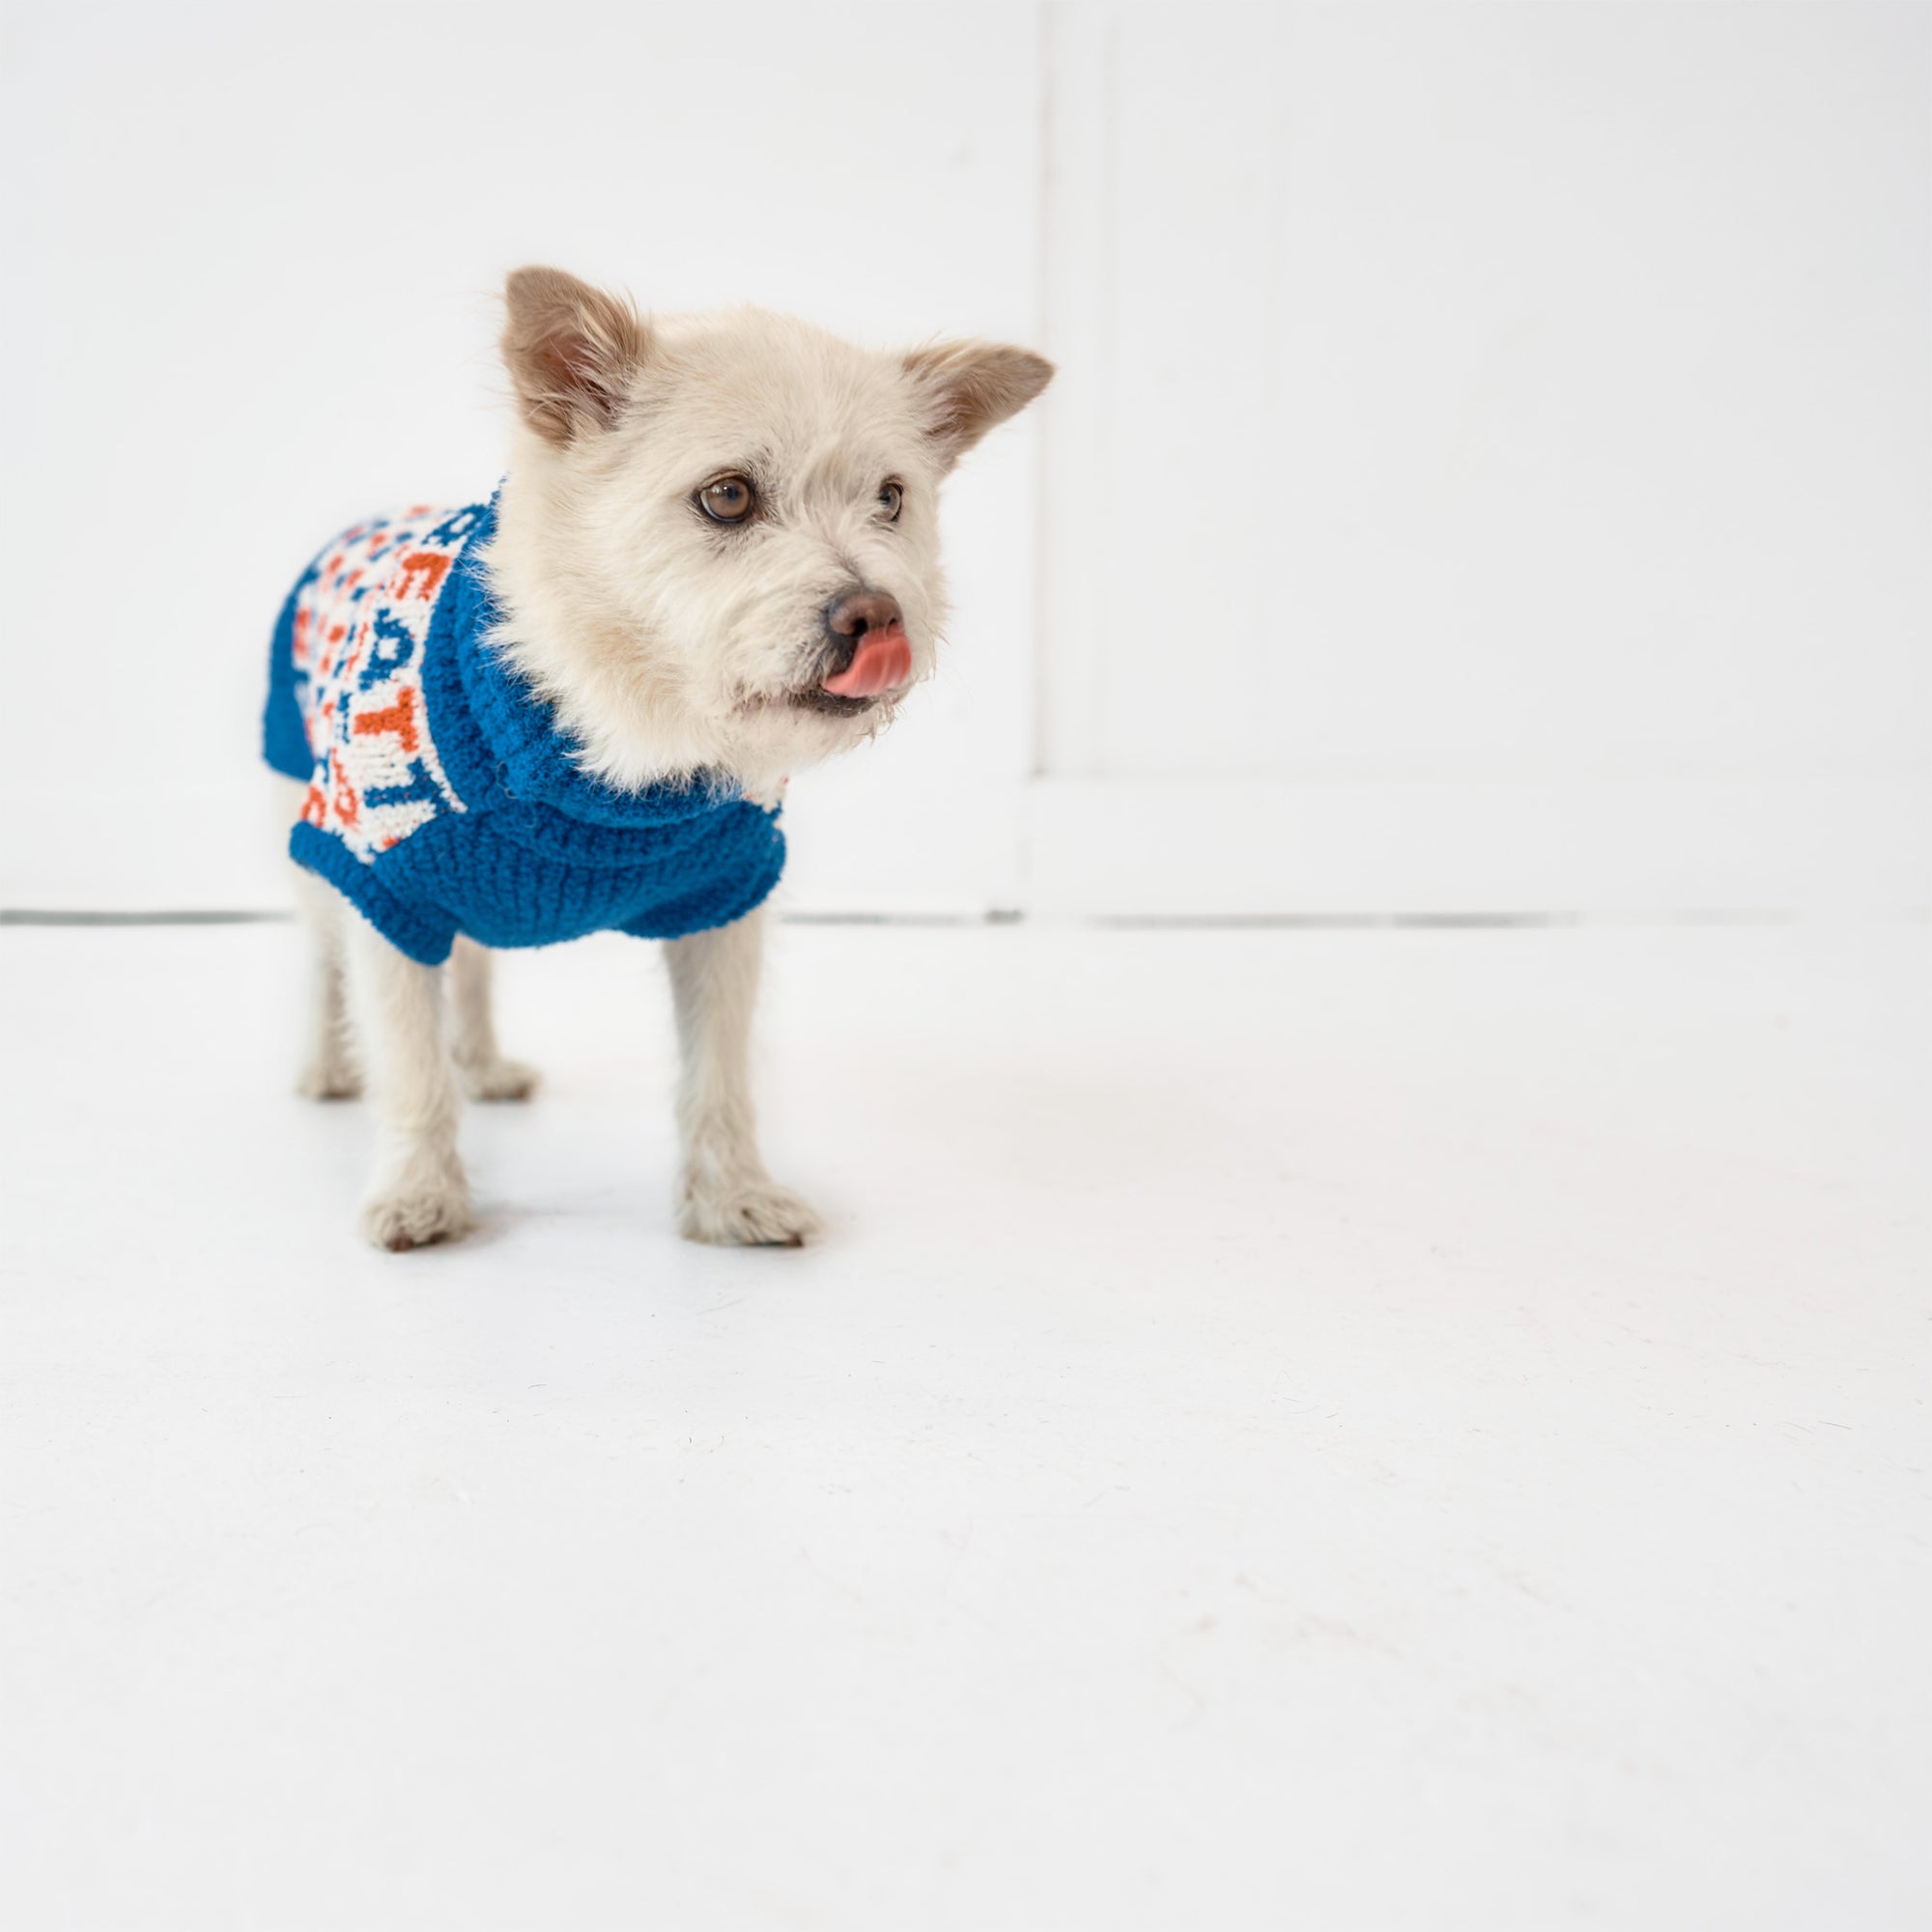 A small, attentive dog with a light coat and a blue 'Treat' patterned sweater appears eager for fun, hinting at playtime or a treat in a bright, minimalist setting.